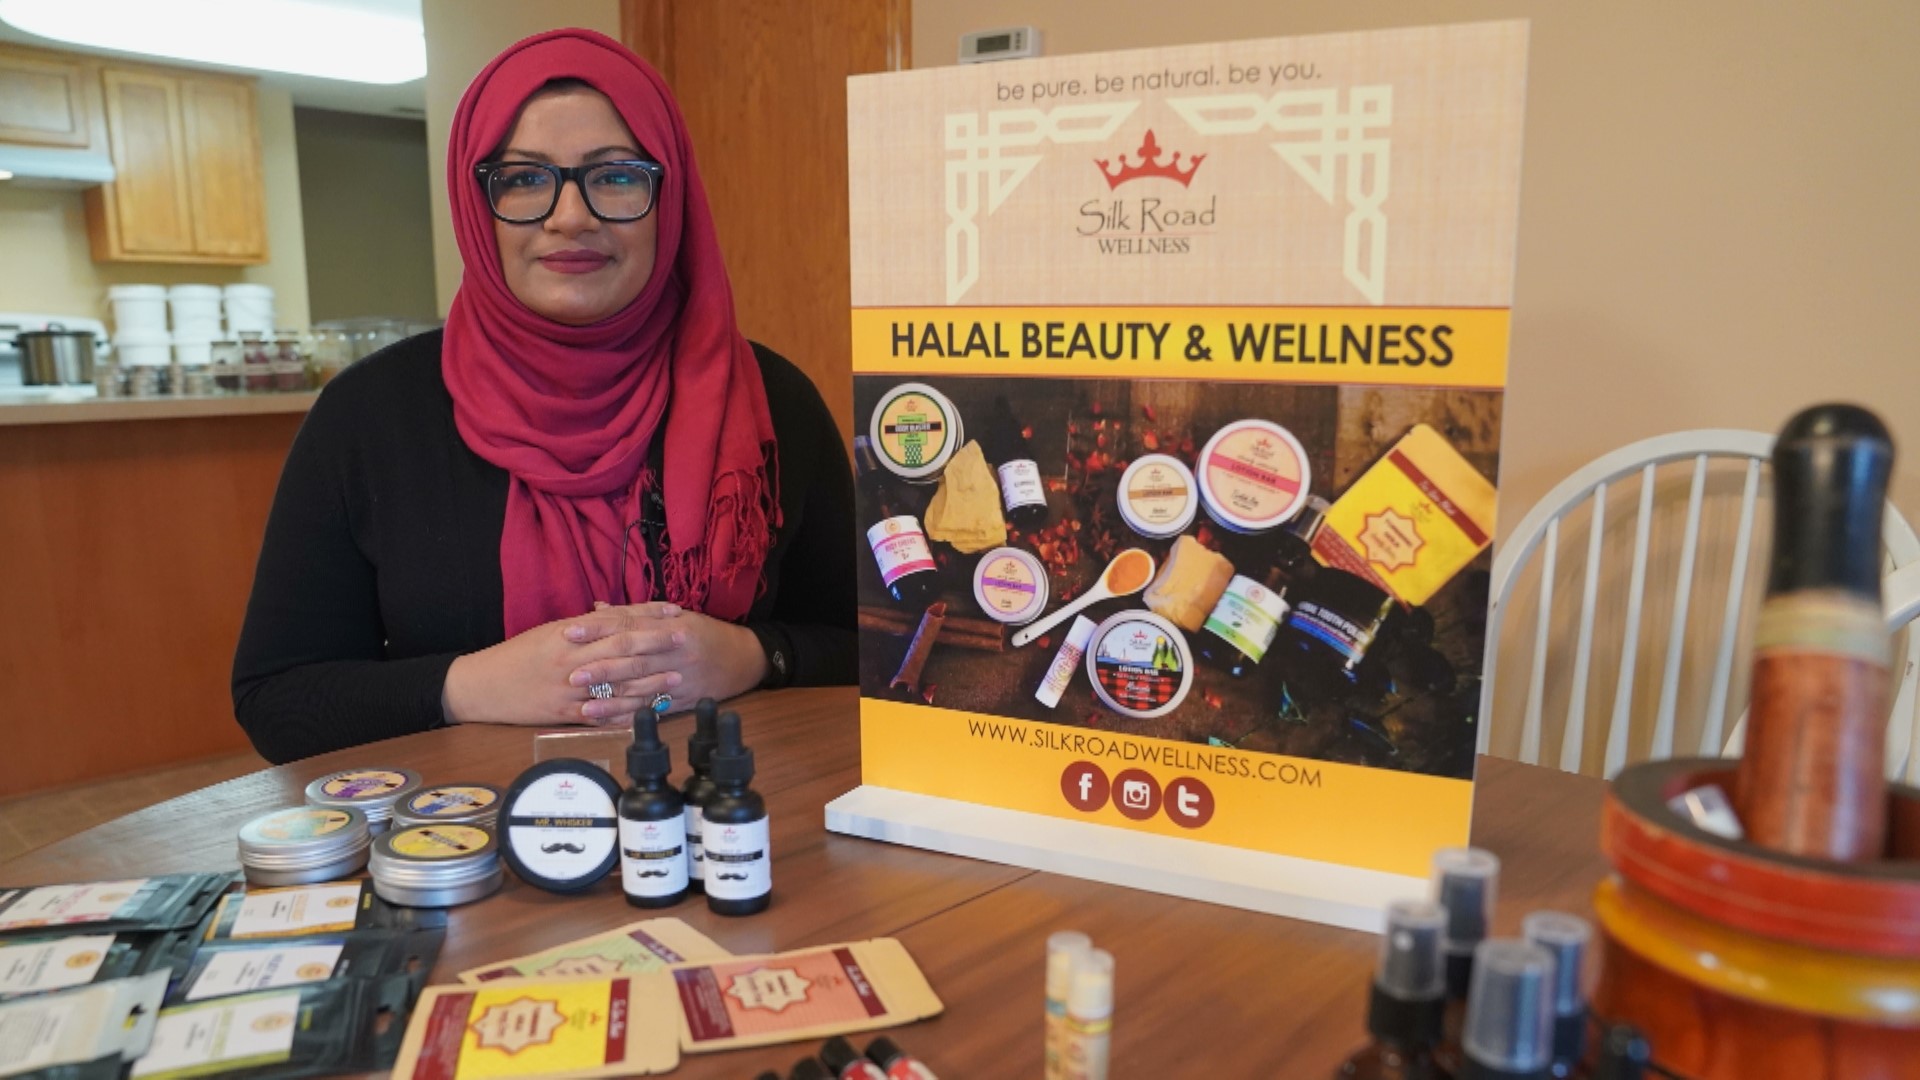 Annie Qaiser, co-founder of Silk Road Wellness, handcrafts halal-certified skincare and wellness products from her home in Rosemount.